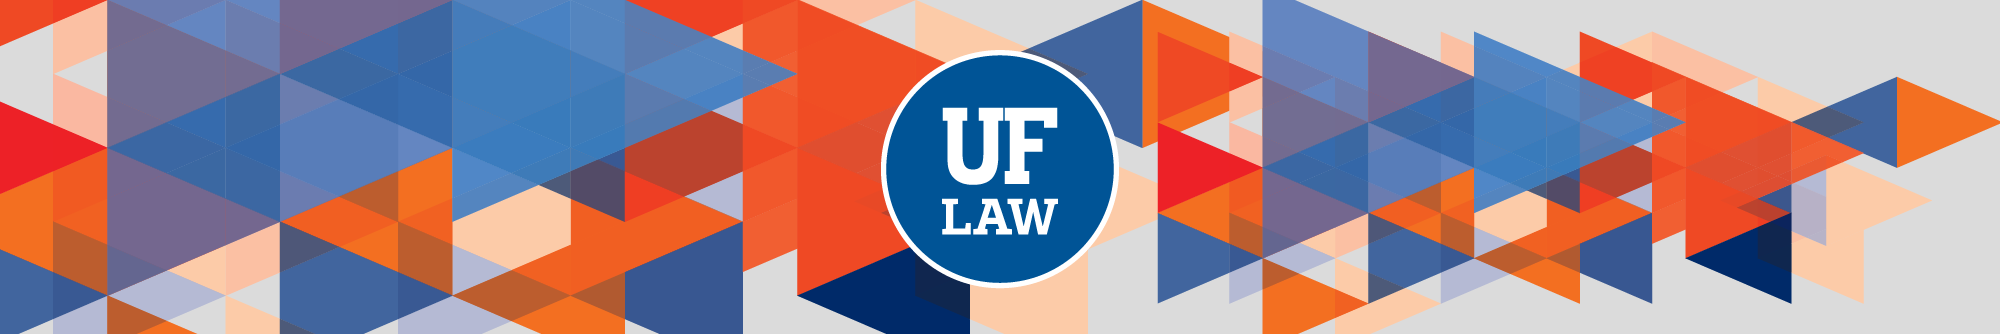 Ranking Graphics Colorful Arrows UF Law